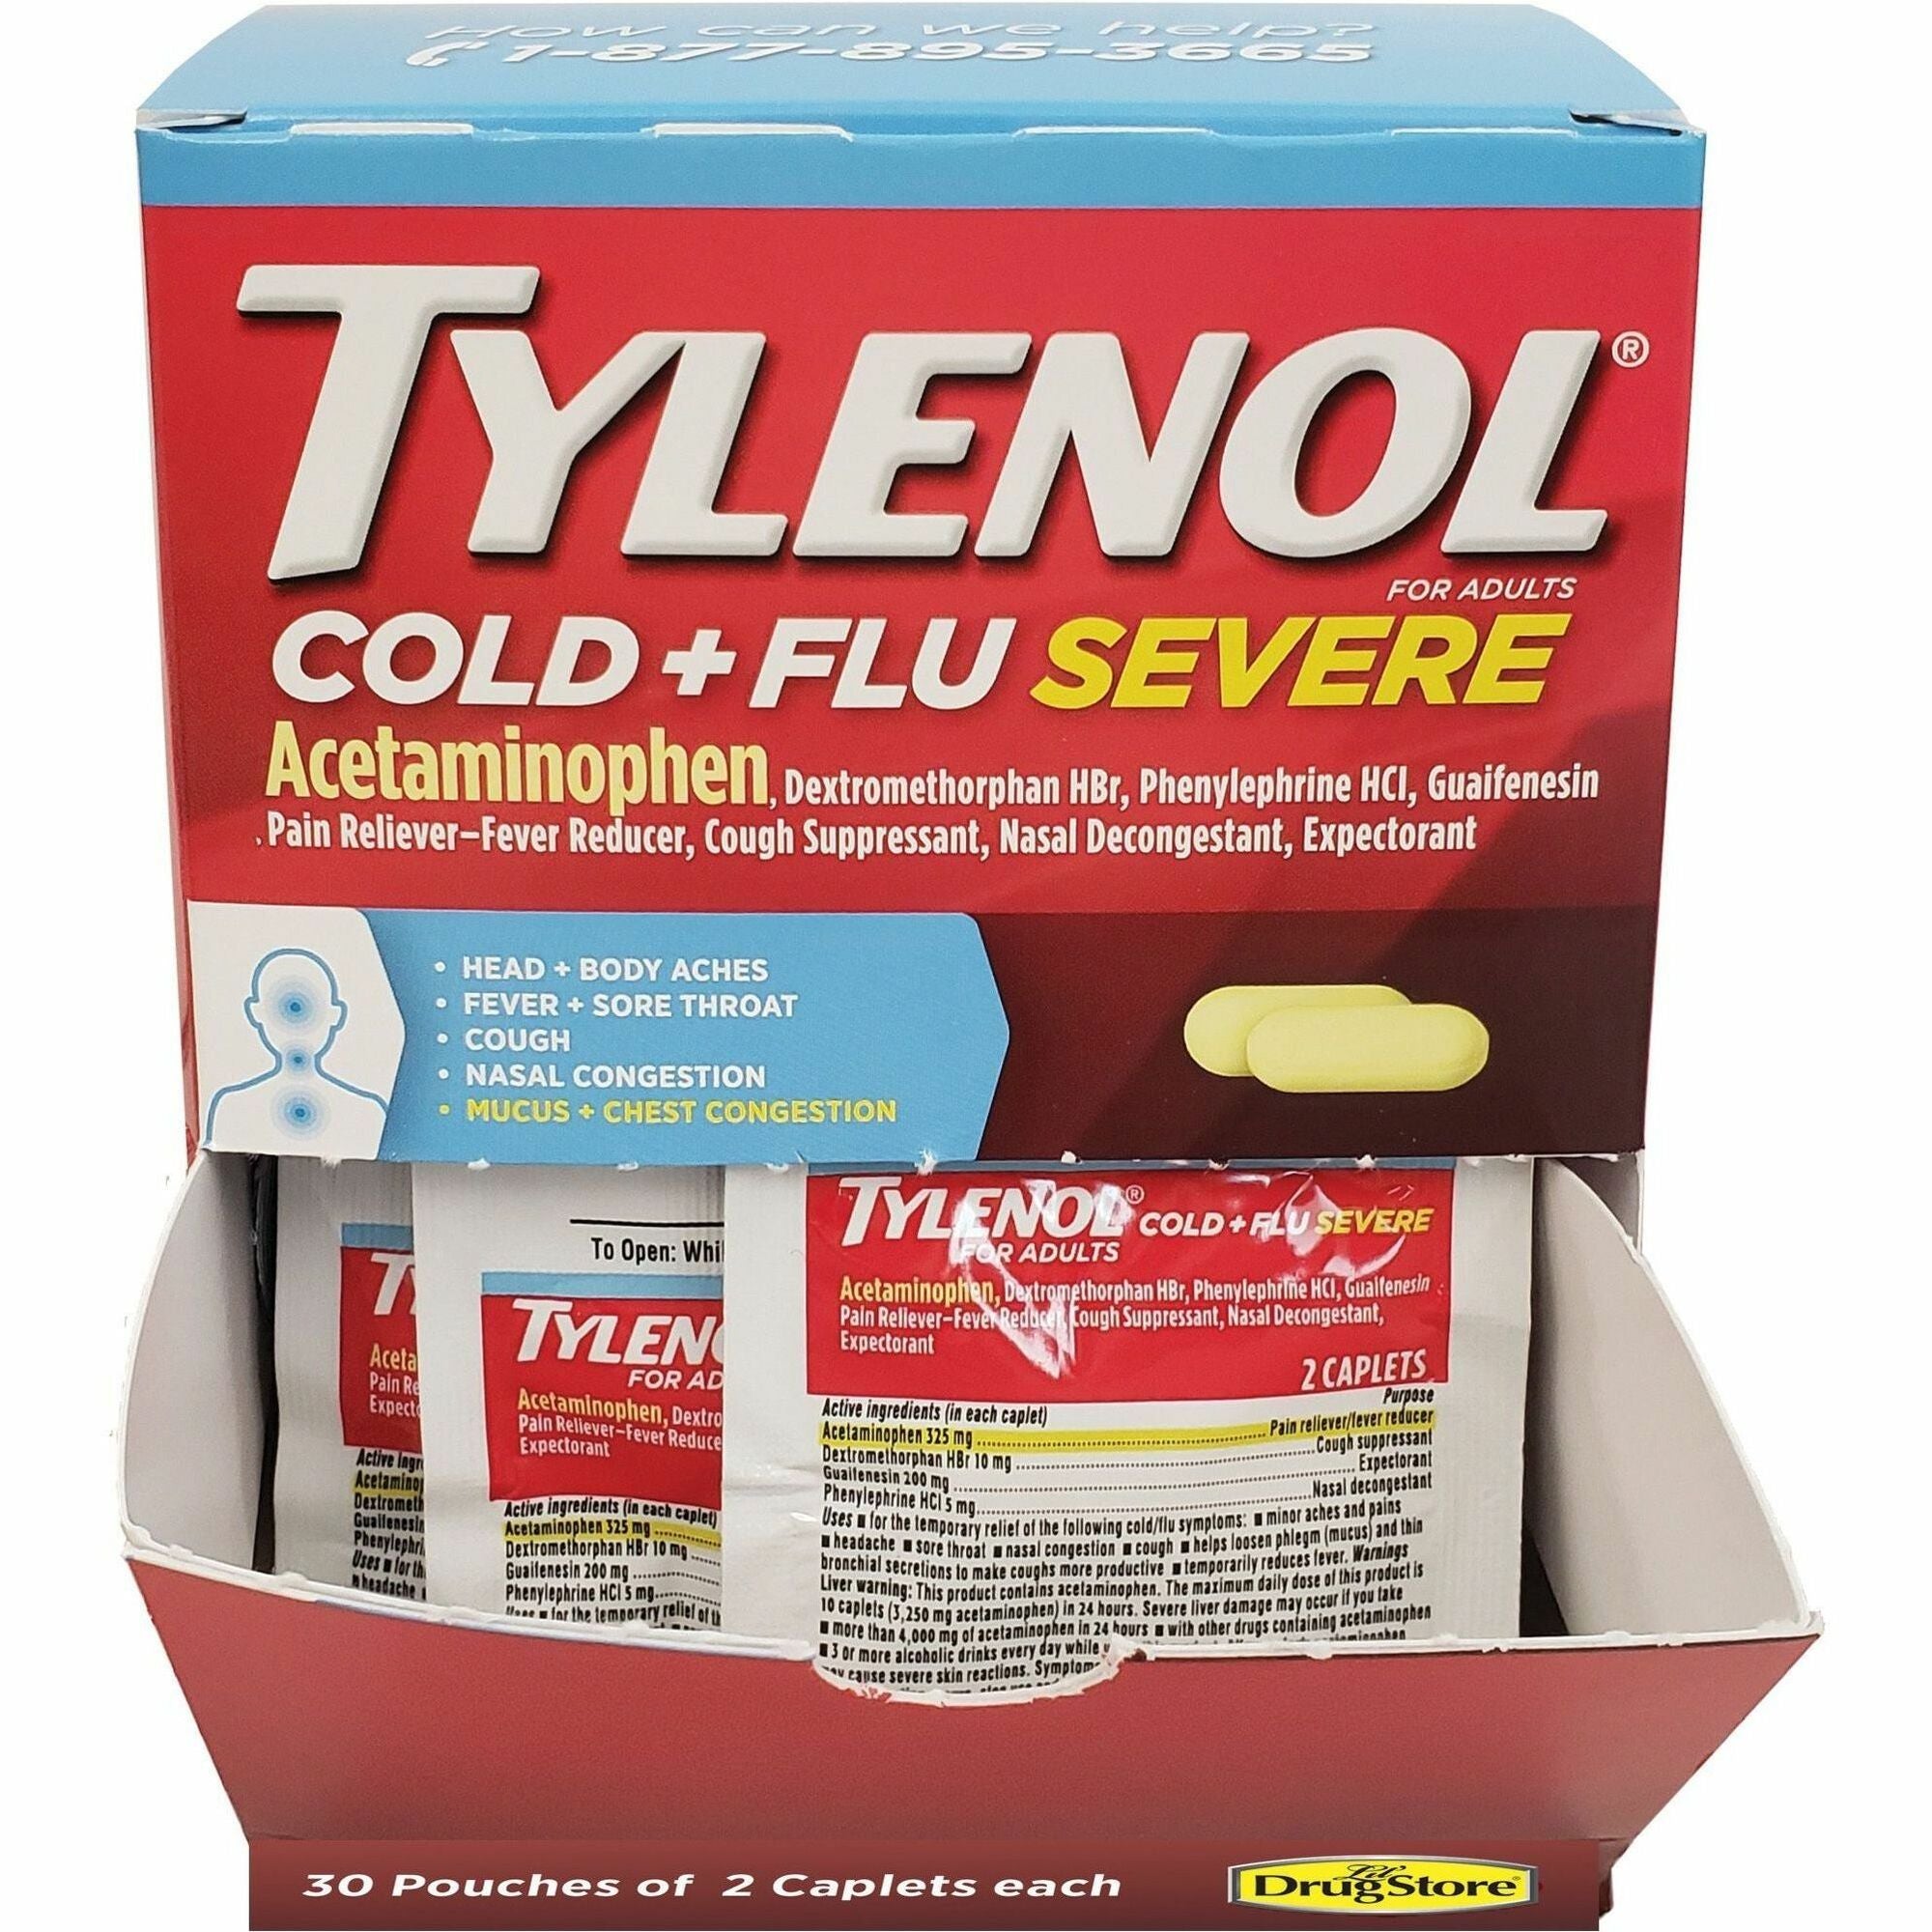 tylenol-cold-&-flu-severe-single-dose-packets-for-tylenol-cold-flu-fever-body-ache-pain-headache-sore-throat-nasal-congestion-cough-30-boxpacket_lil64568 - 1